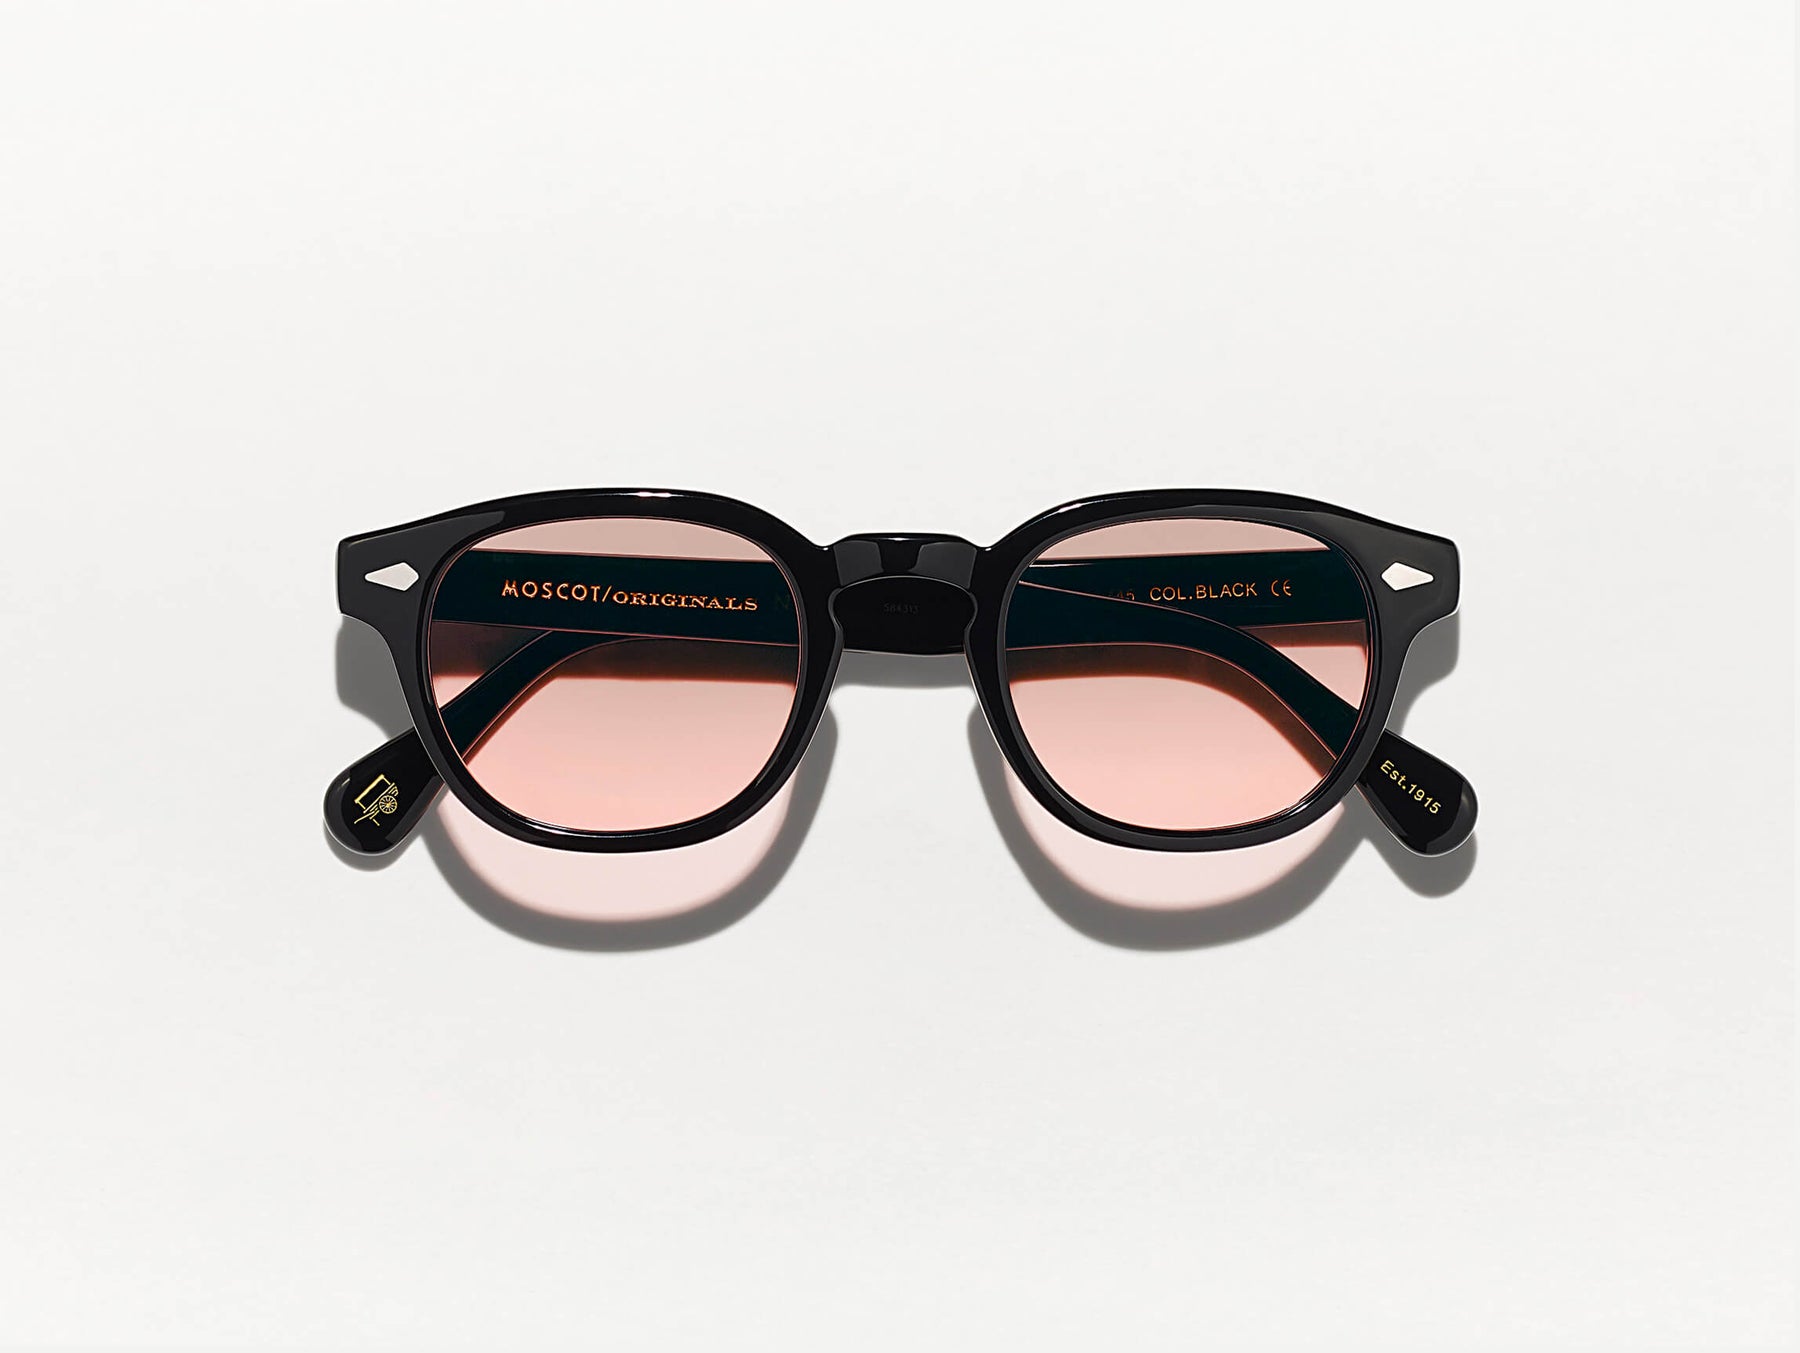 The LEMTOSH Black with New York Rose Tinted Lenses